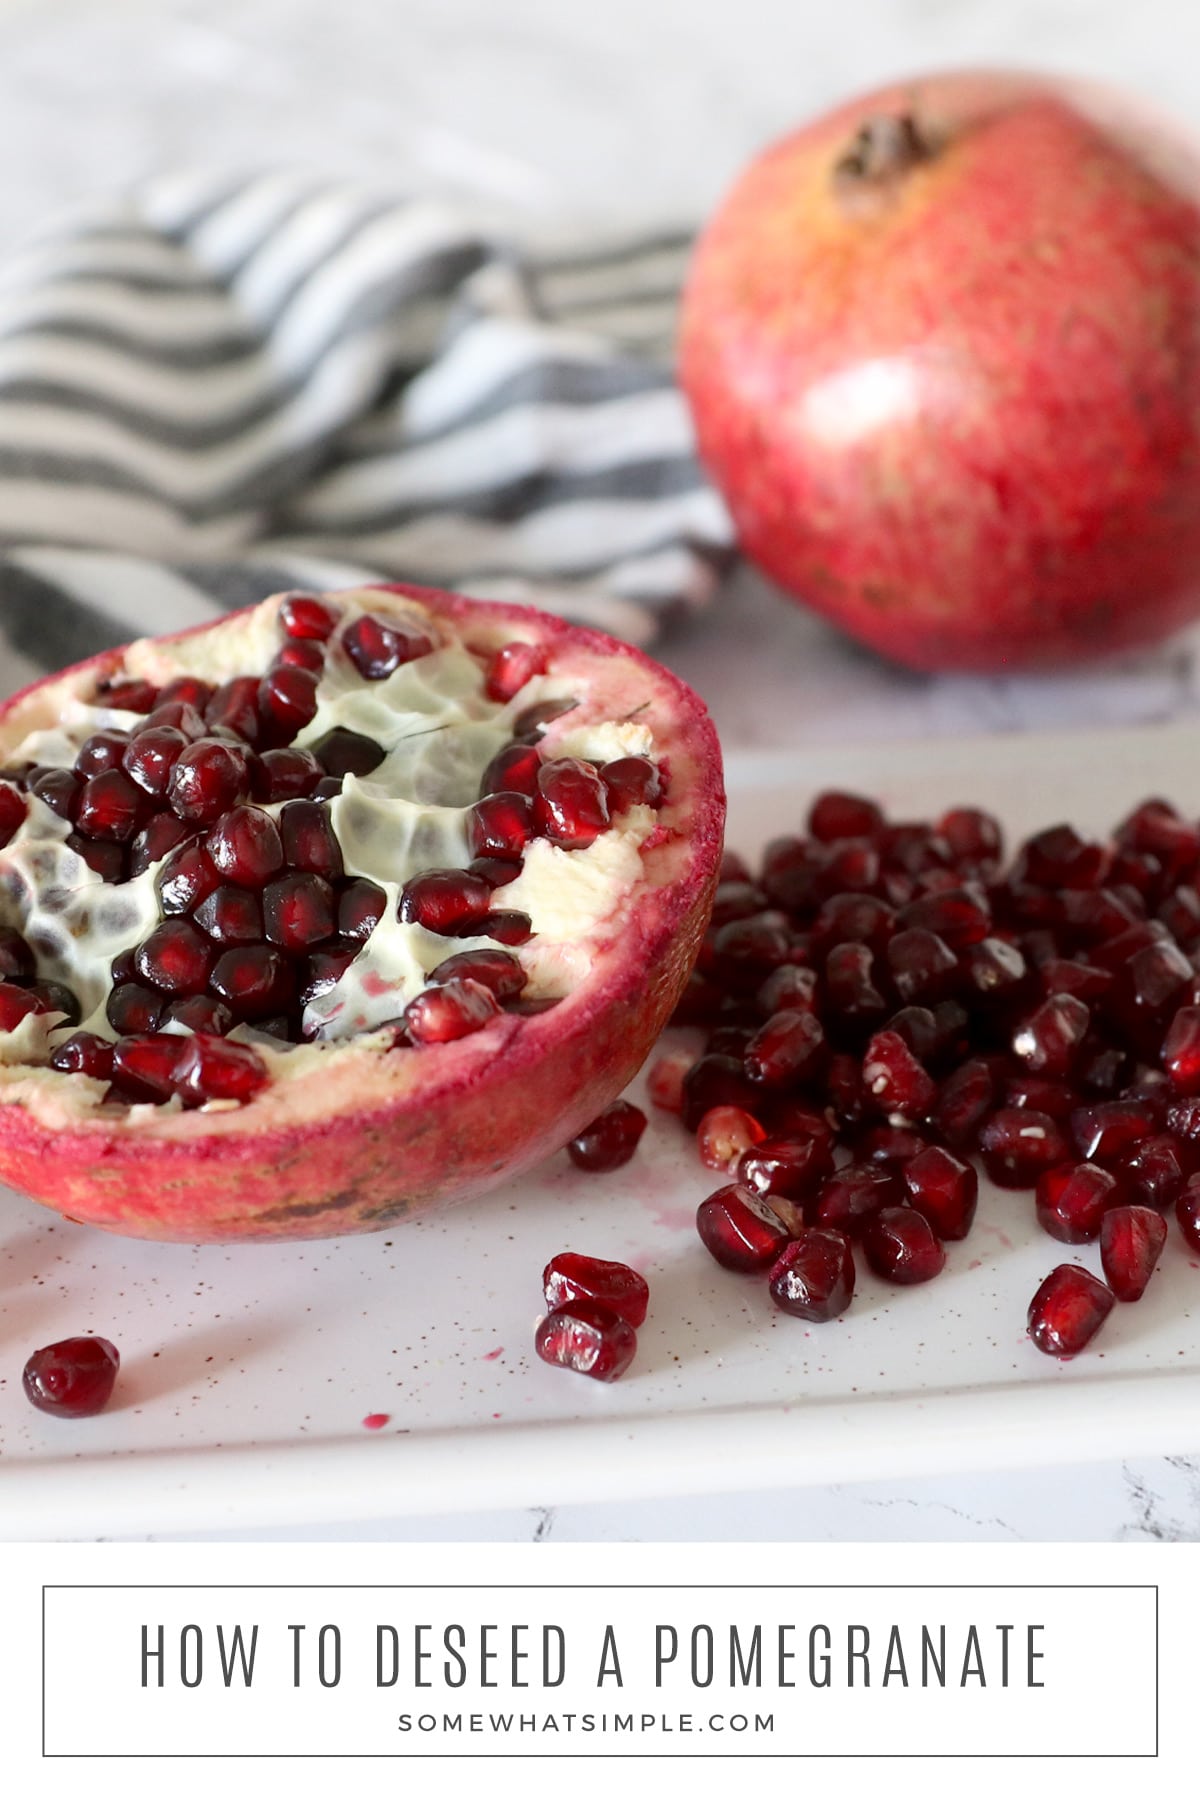 https://www.somewhatsimple.com/wp-content/uploads/2021/12/pomegranate-deseed-easy.jpg